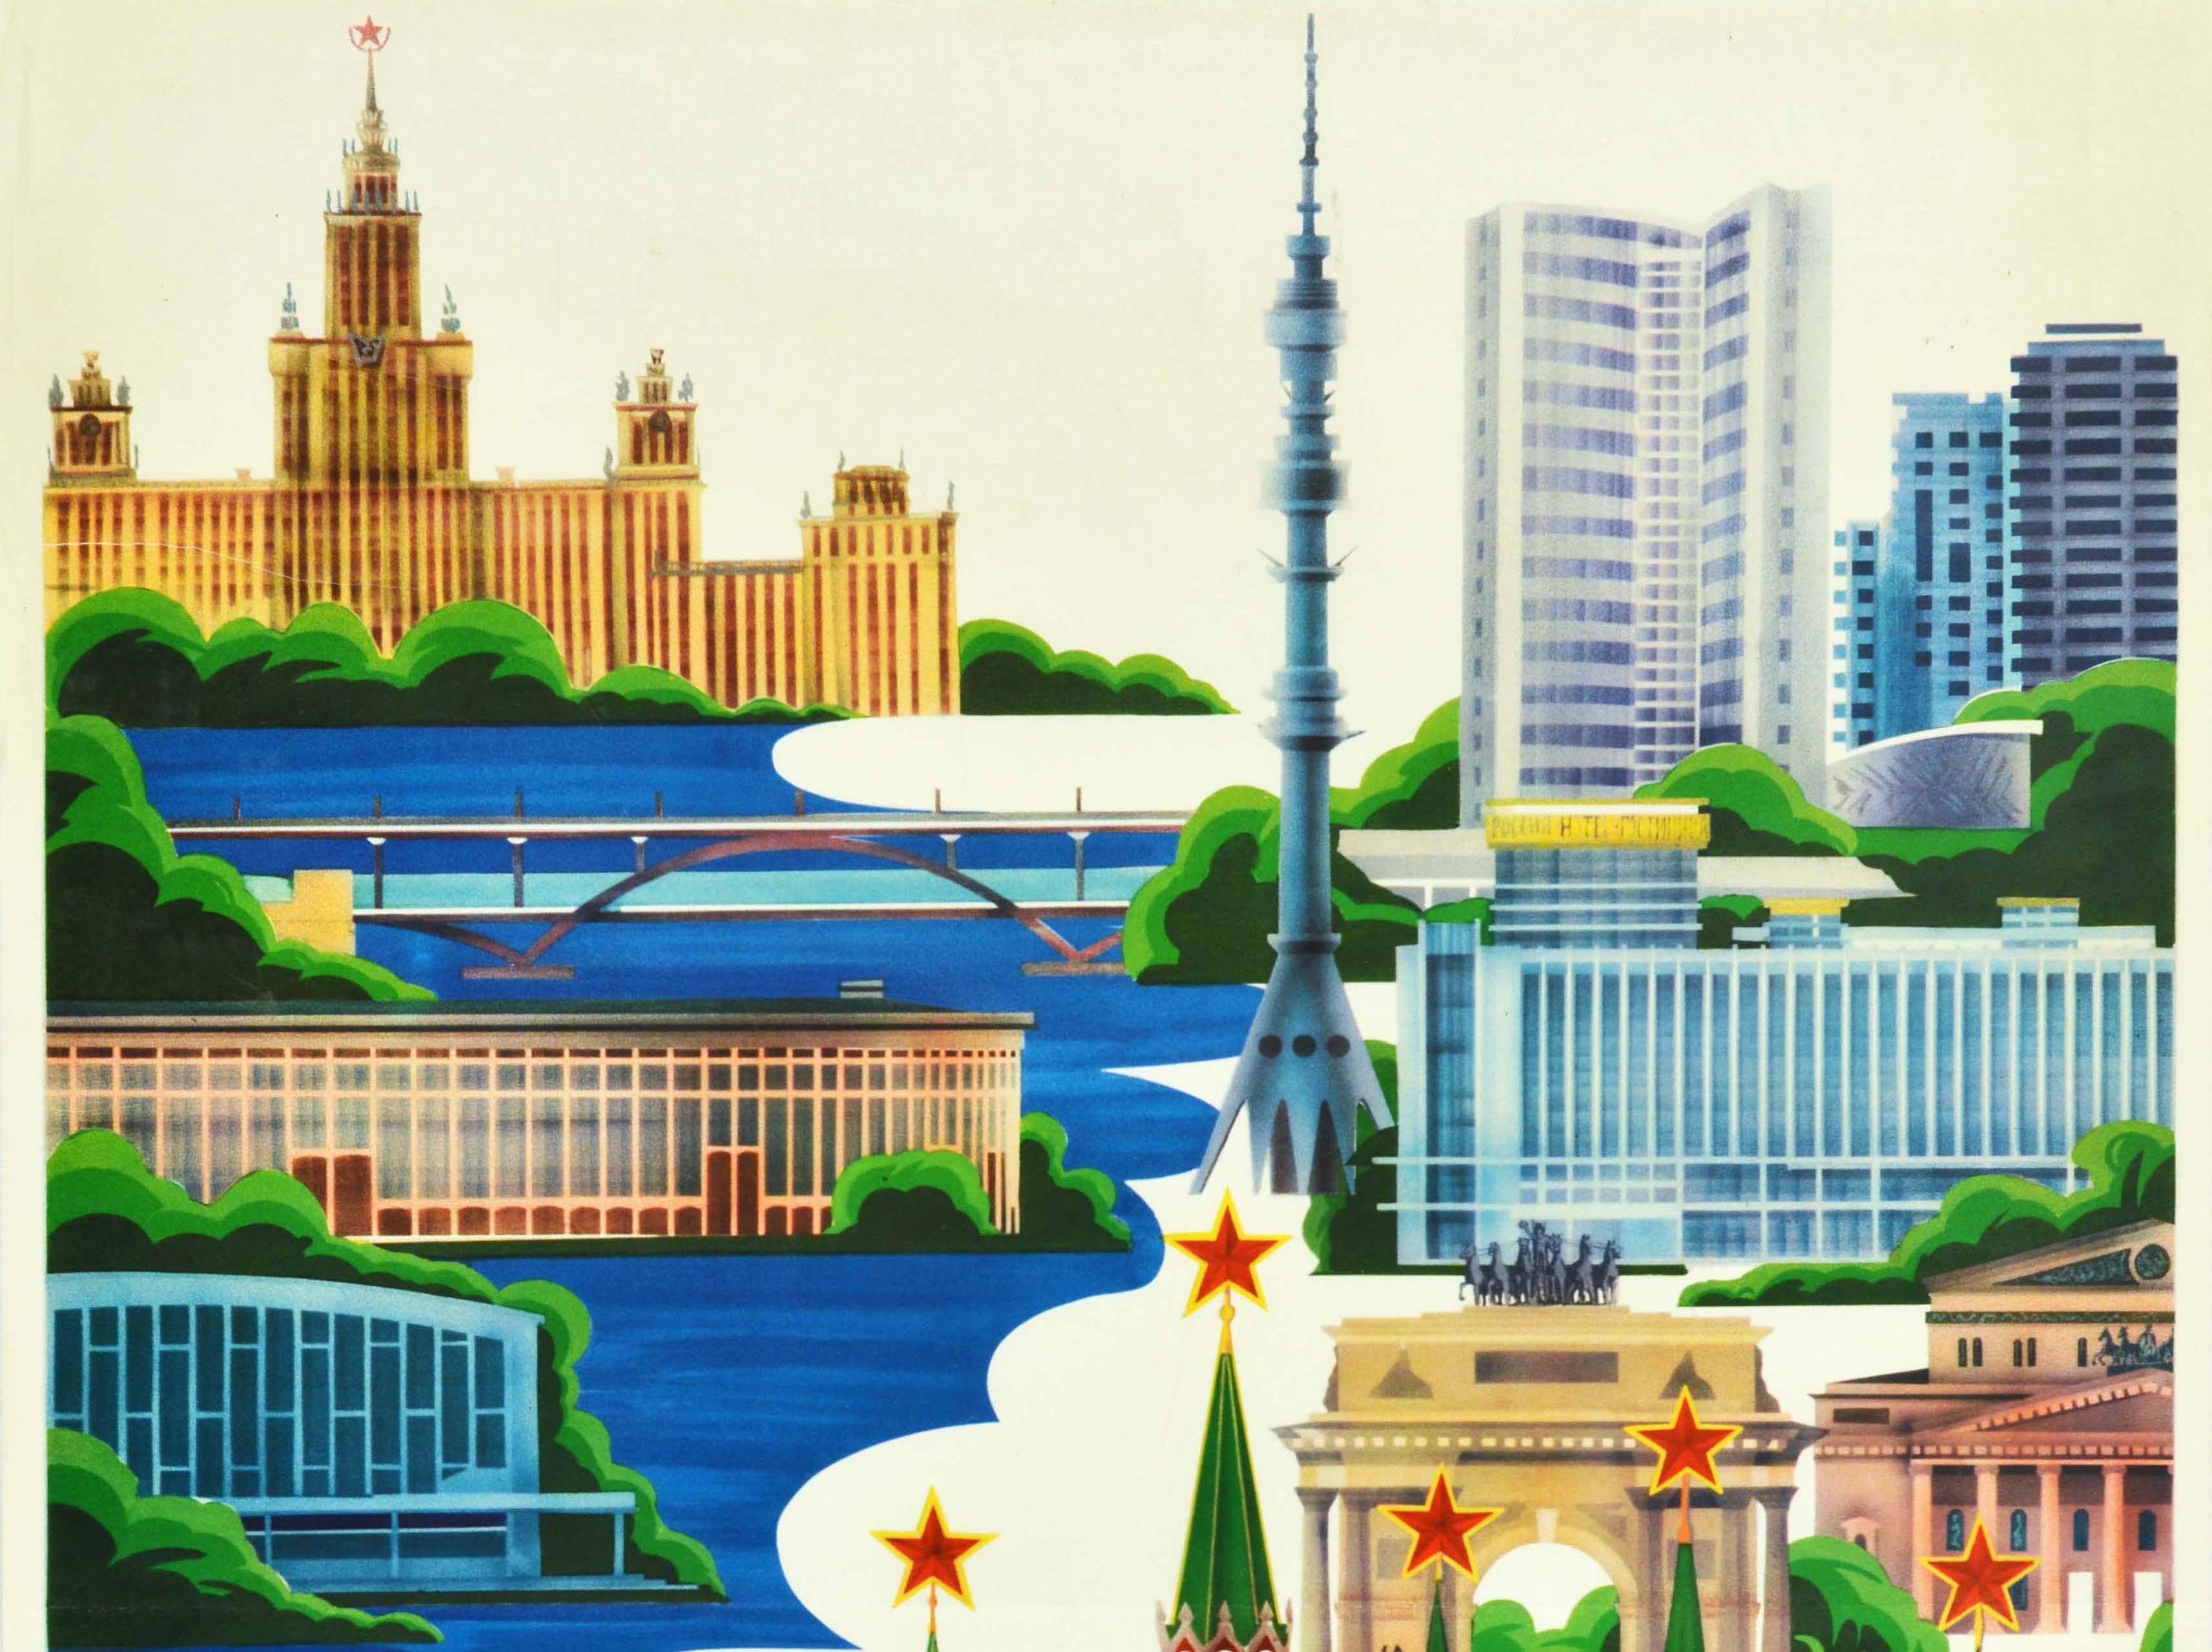 Original Vintage Sport Poster Moscow Olympics 1980 Moskva City Art Architecture - Print by Makarenko